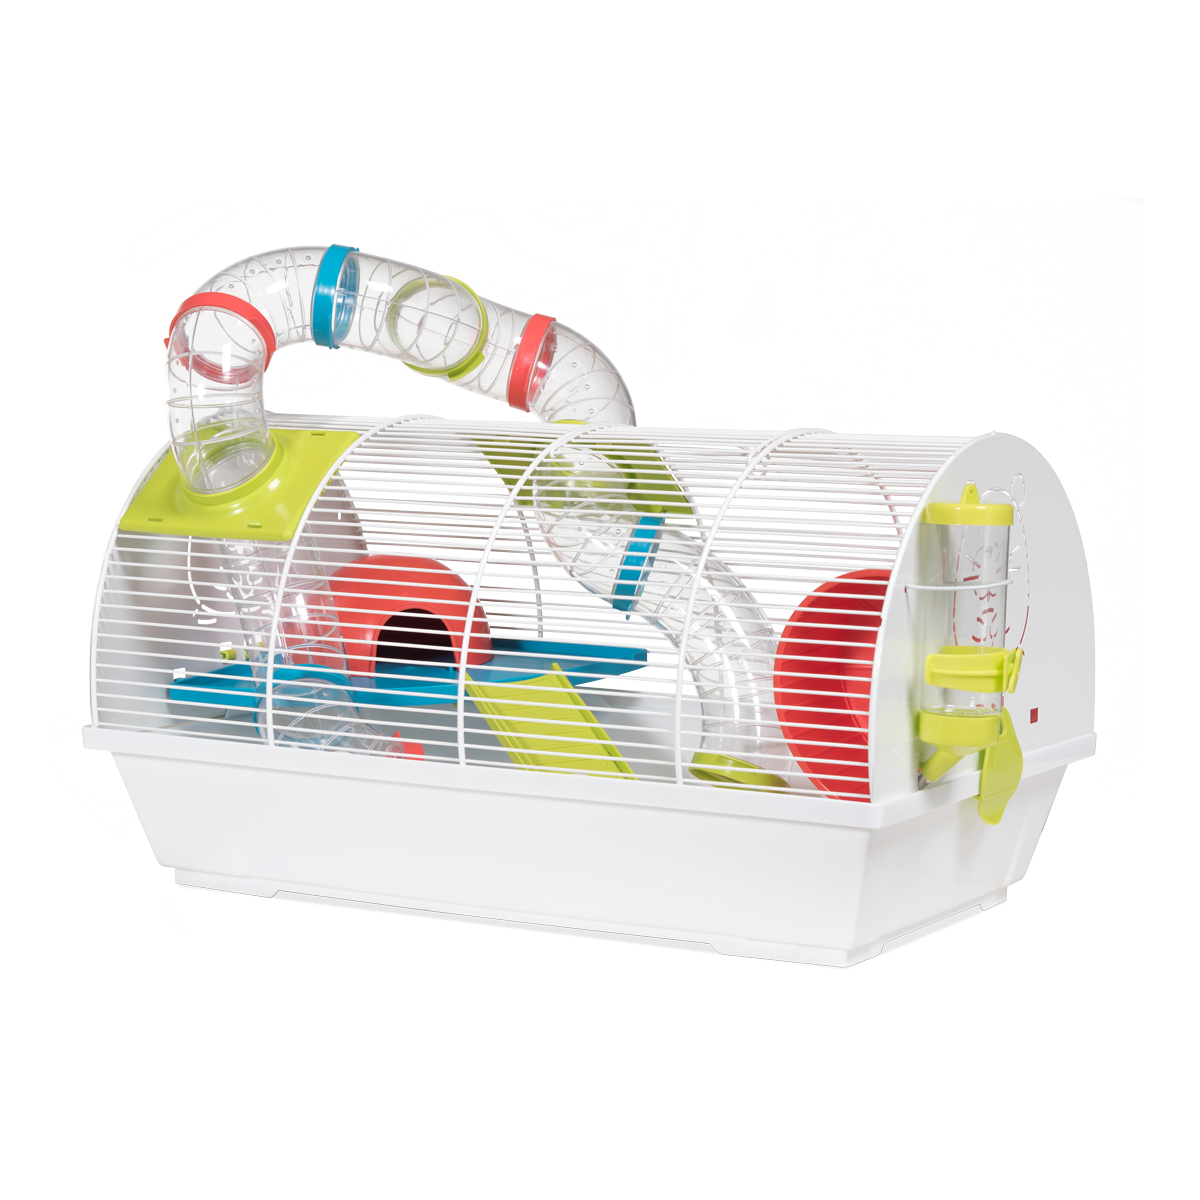 VOLTREGA SPAIN HAMSTER CAGE 119 WHITE Depth 50.5 cm Width 28 cm Height 26.5 cm Weight 2.2